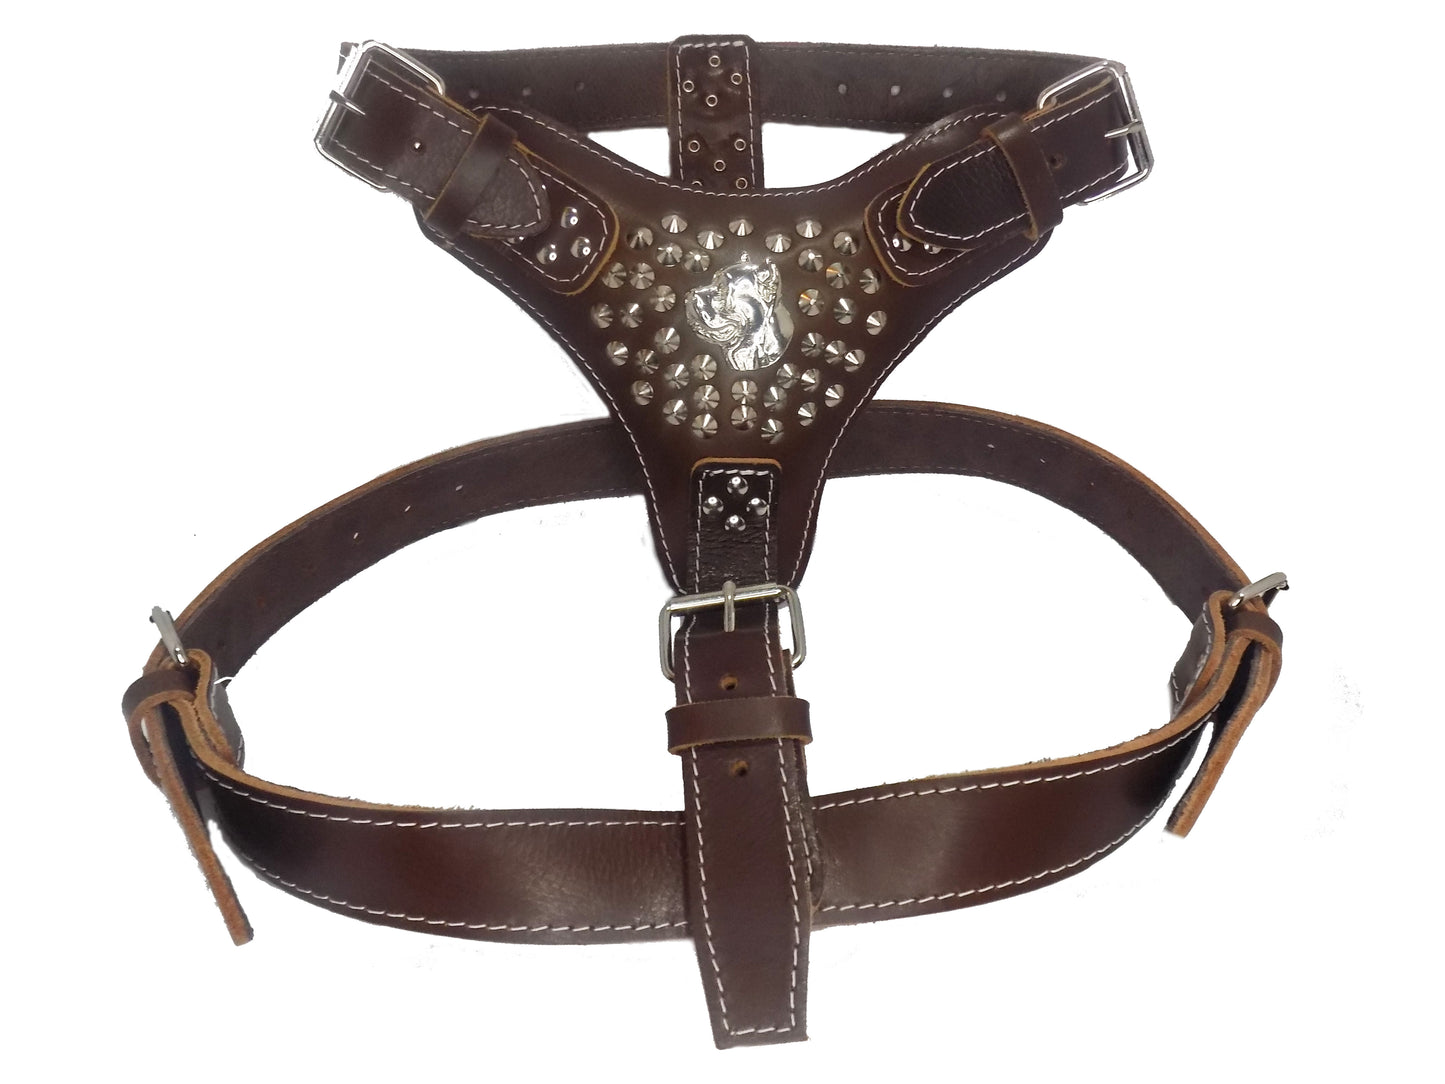 Extra Large Heavy Duty Leather Dog Harness with Cane Corso and Studded Design